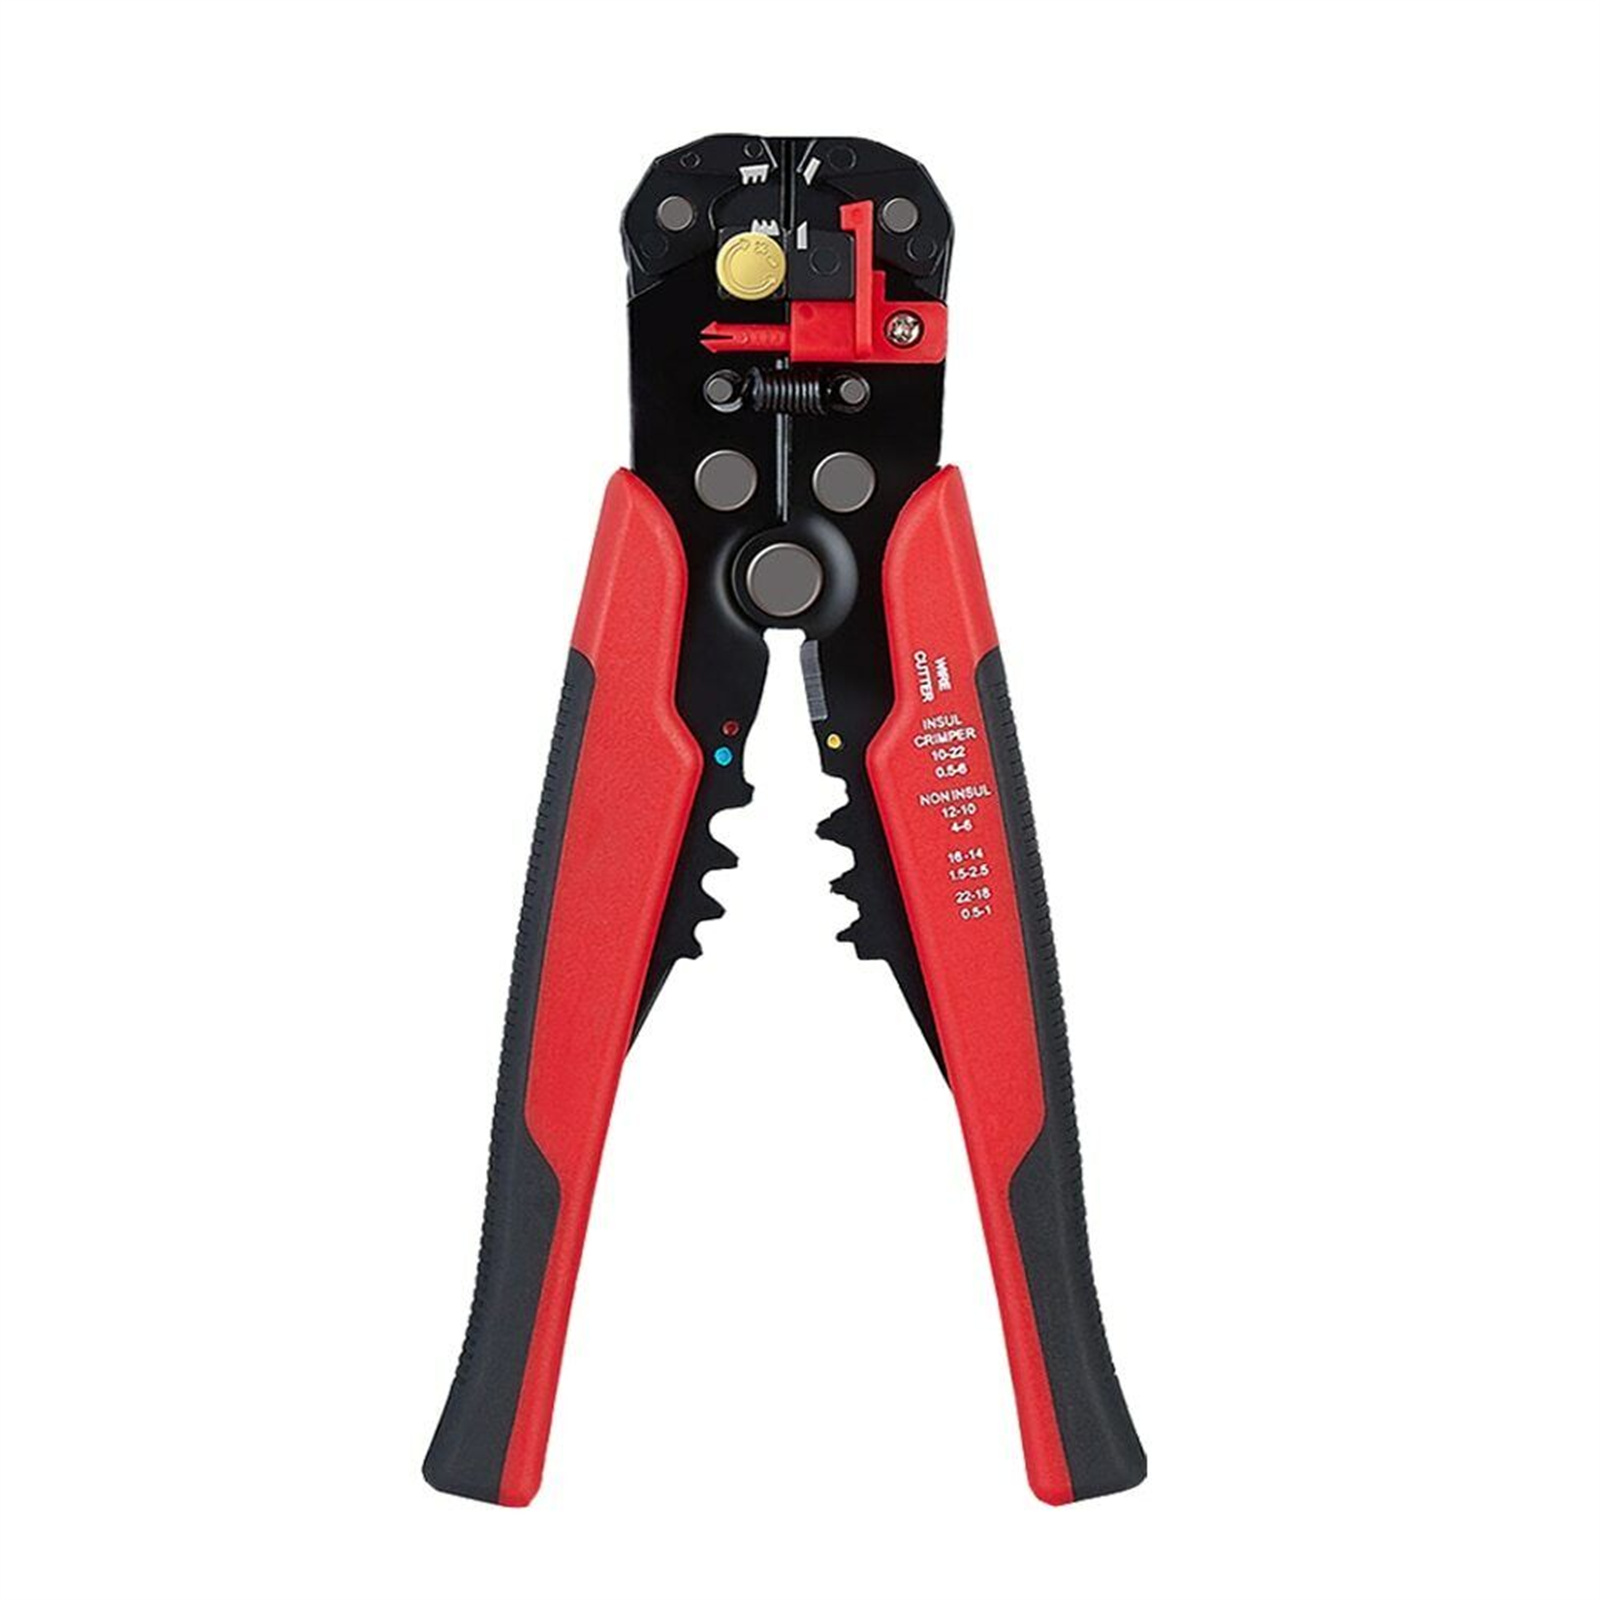 Multifunctional Wire Stripping Pliers 5-in-1 Adjustable Wire Stripper Tool With Cutting Crimping For Efficient Electrical Work